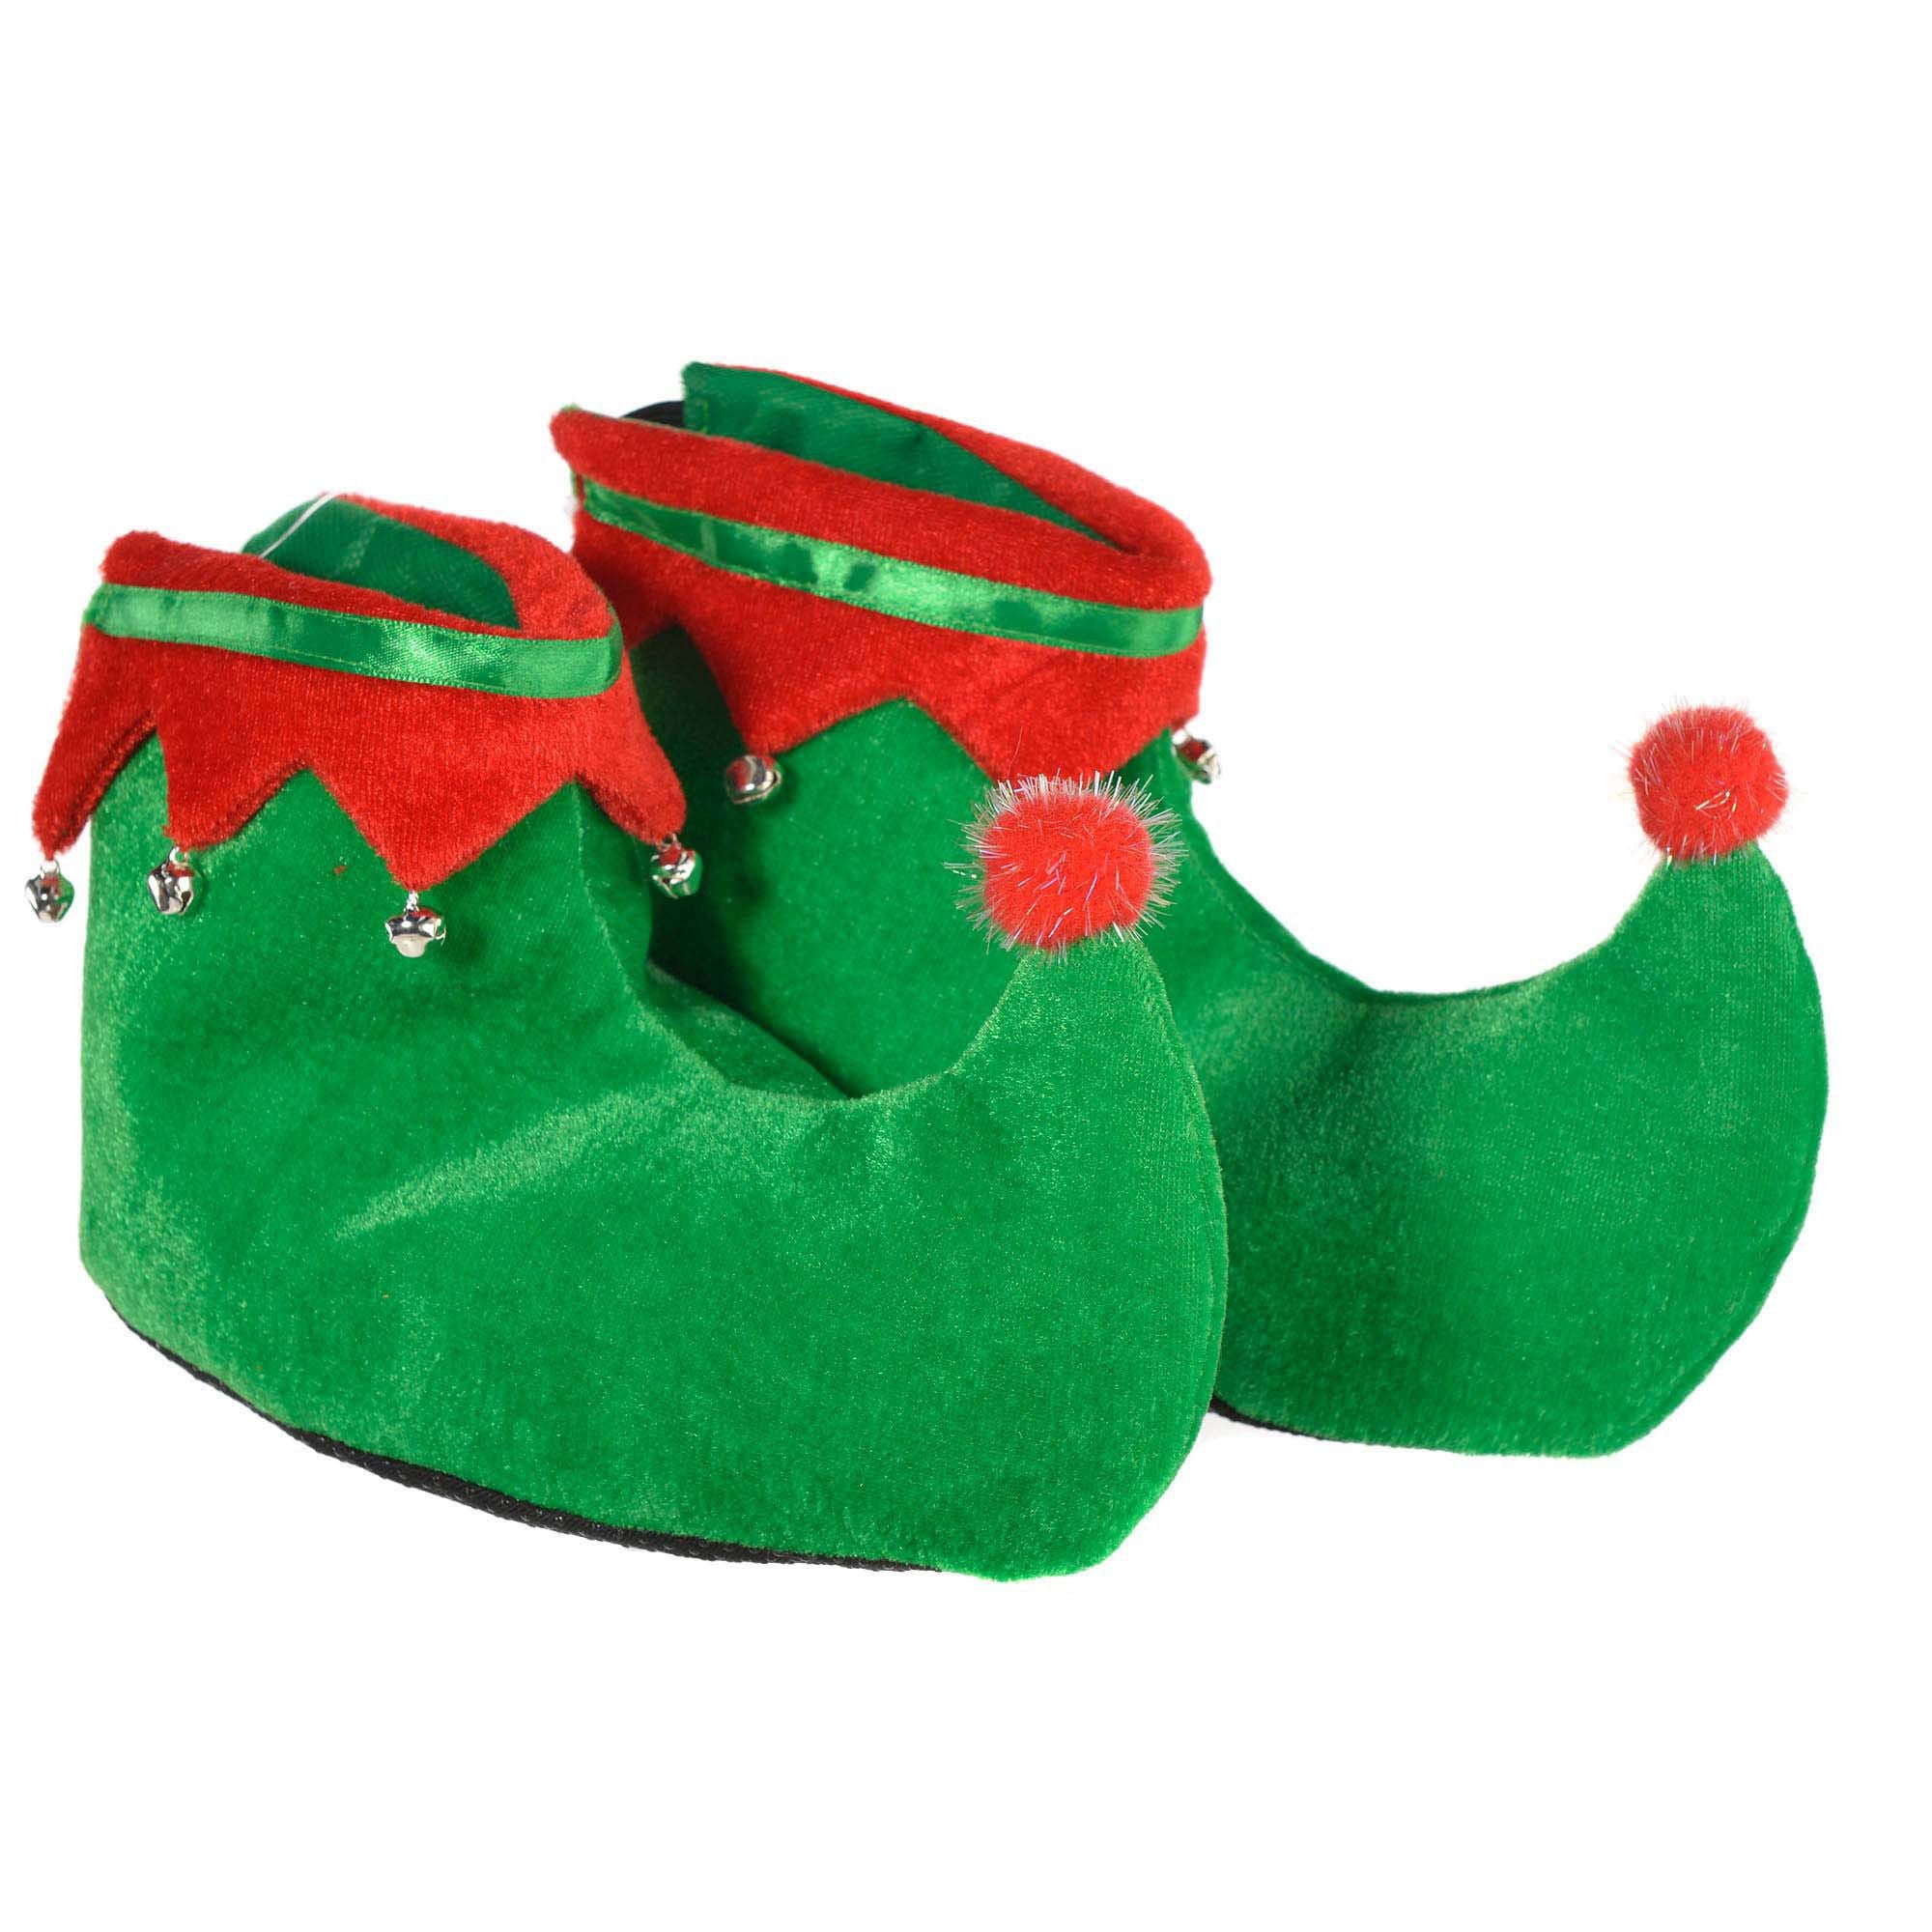 Amscan HOLIDAY: CHRISTMAS Child's Elf Shoes